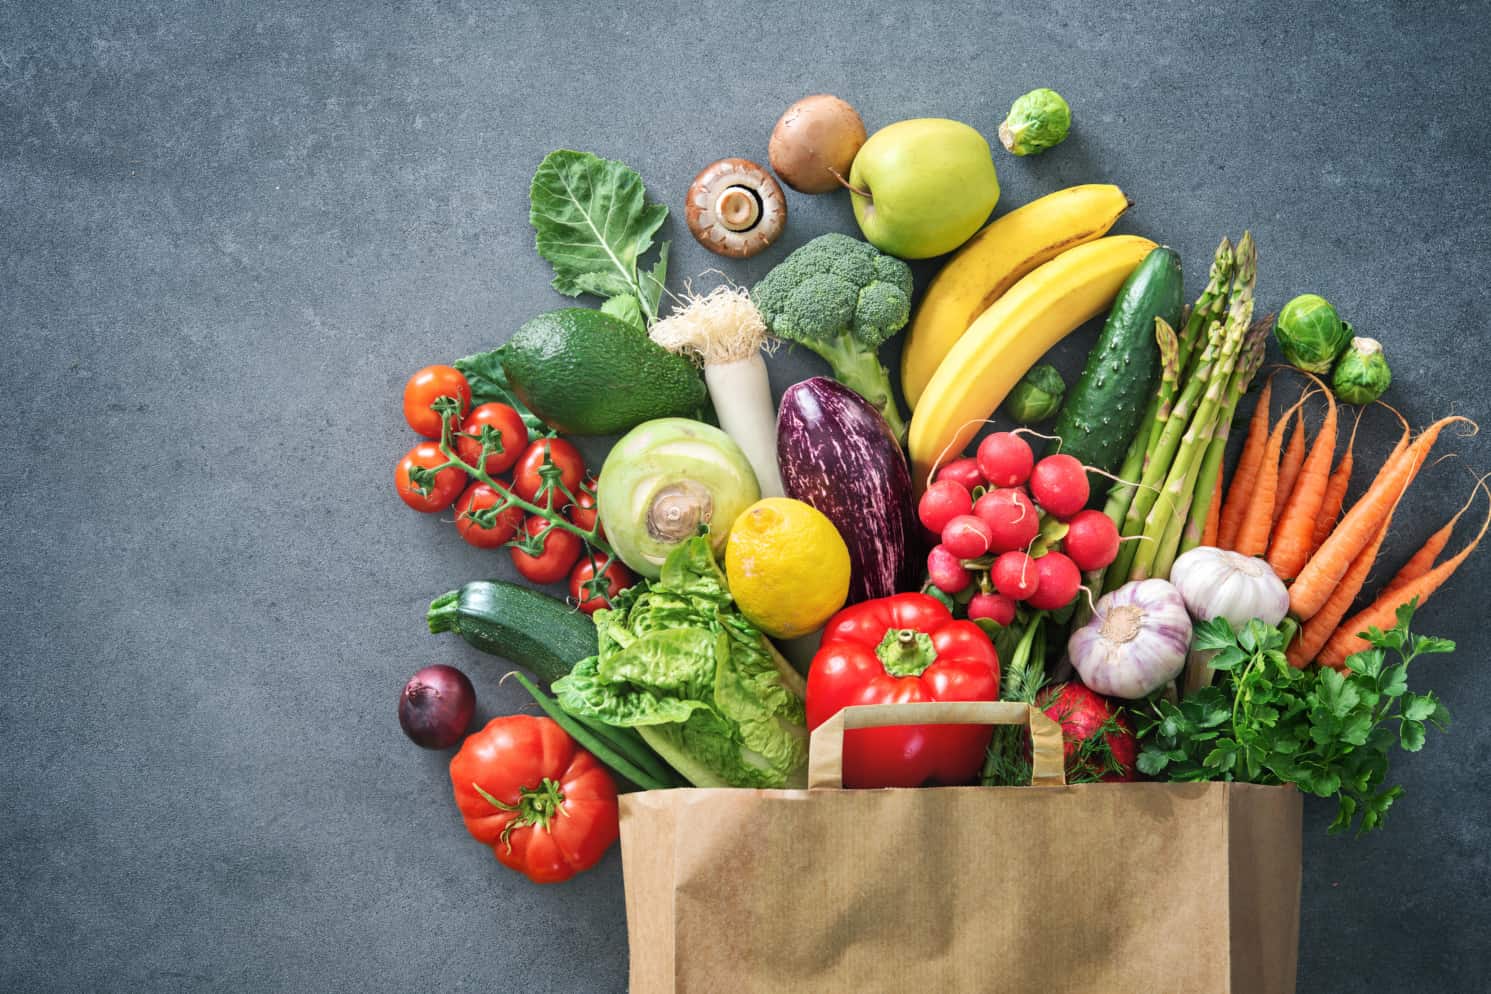 A paper shopping bag full of fresh vegetables and fruits